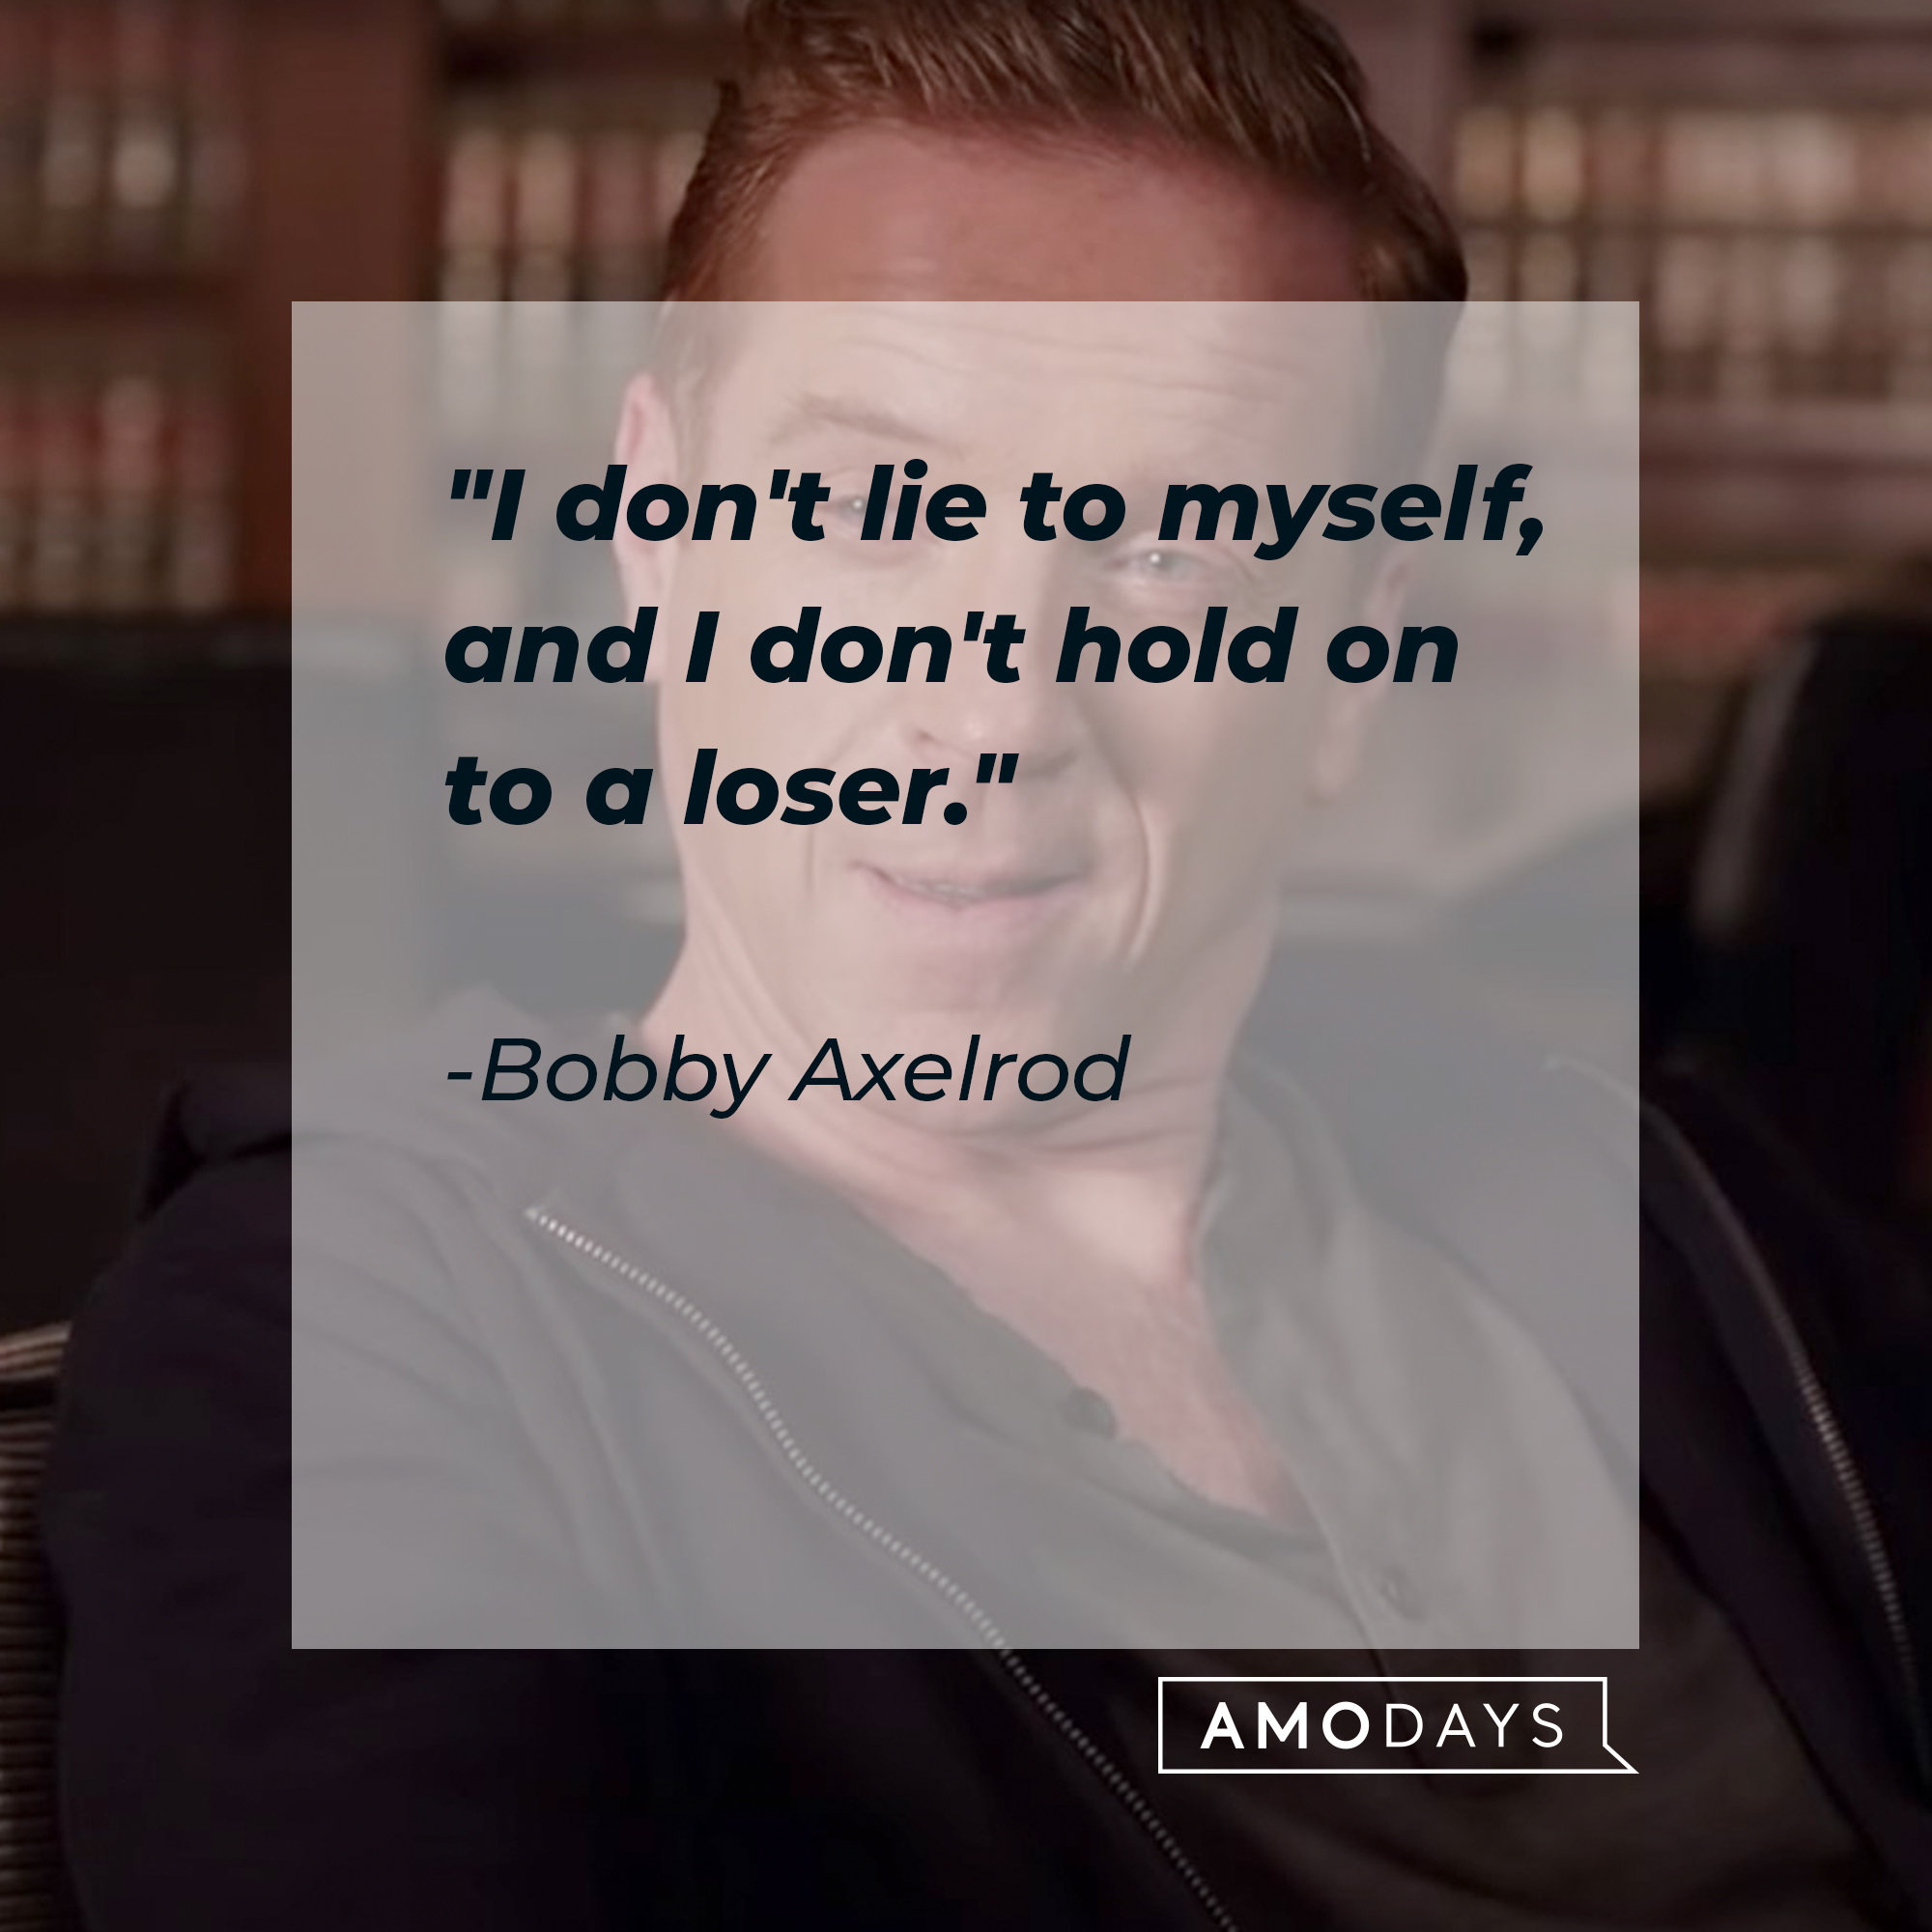 Bobby Axelrod's quote: "I don't lie to myself, and I don't hold on to a loser." | Source: Youtube.com/BillionsOnShowtime